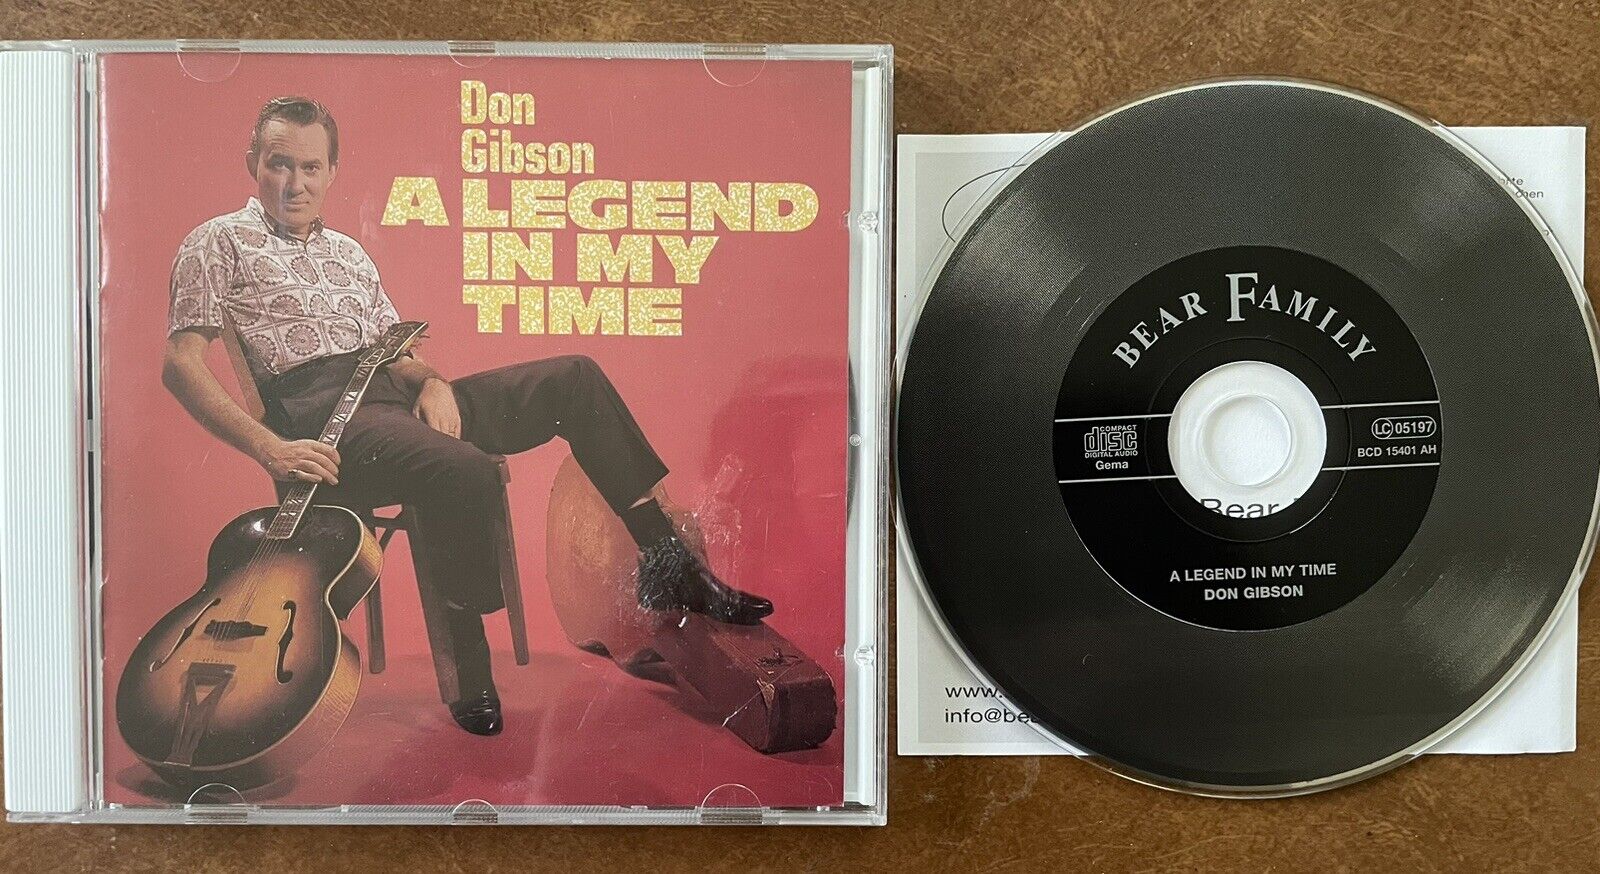 Don Gibson - A Legend in My Time CD - Rare 1987 Disc Varrent, BCD15401 - MINT